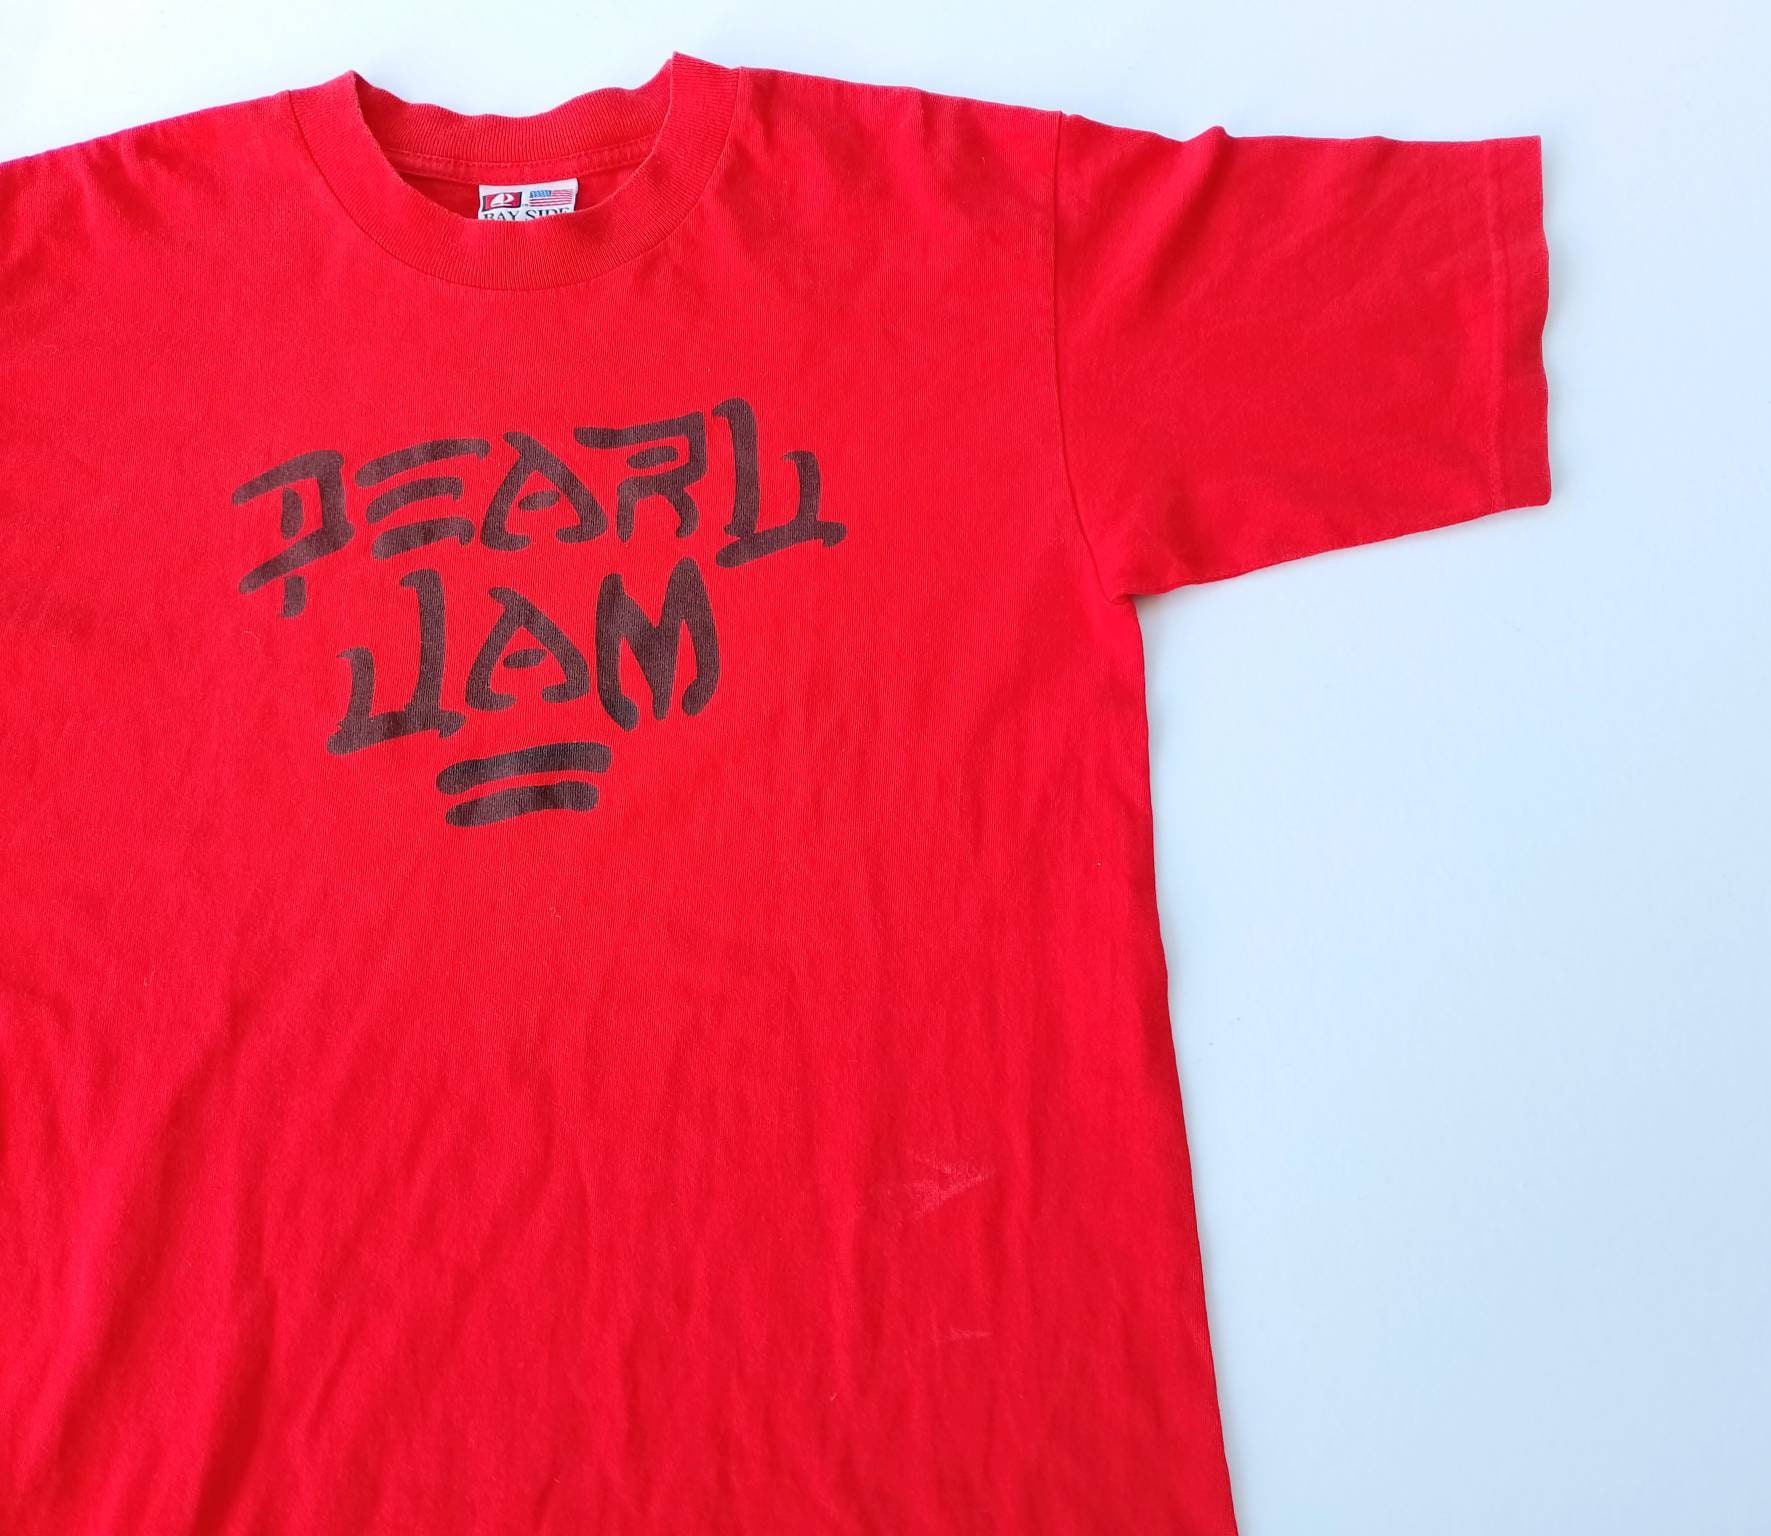 Thrifteees Vintage 90's Pearl Jam Graffiti Text Band Name T Shirt Size M (W 19 x L 28)